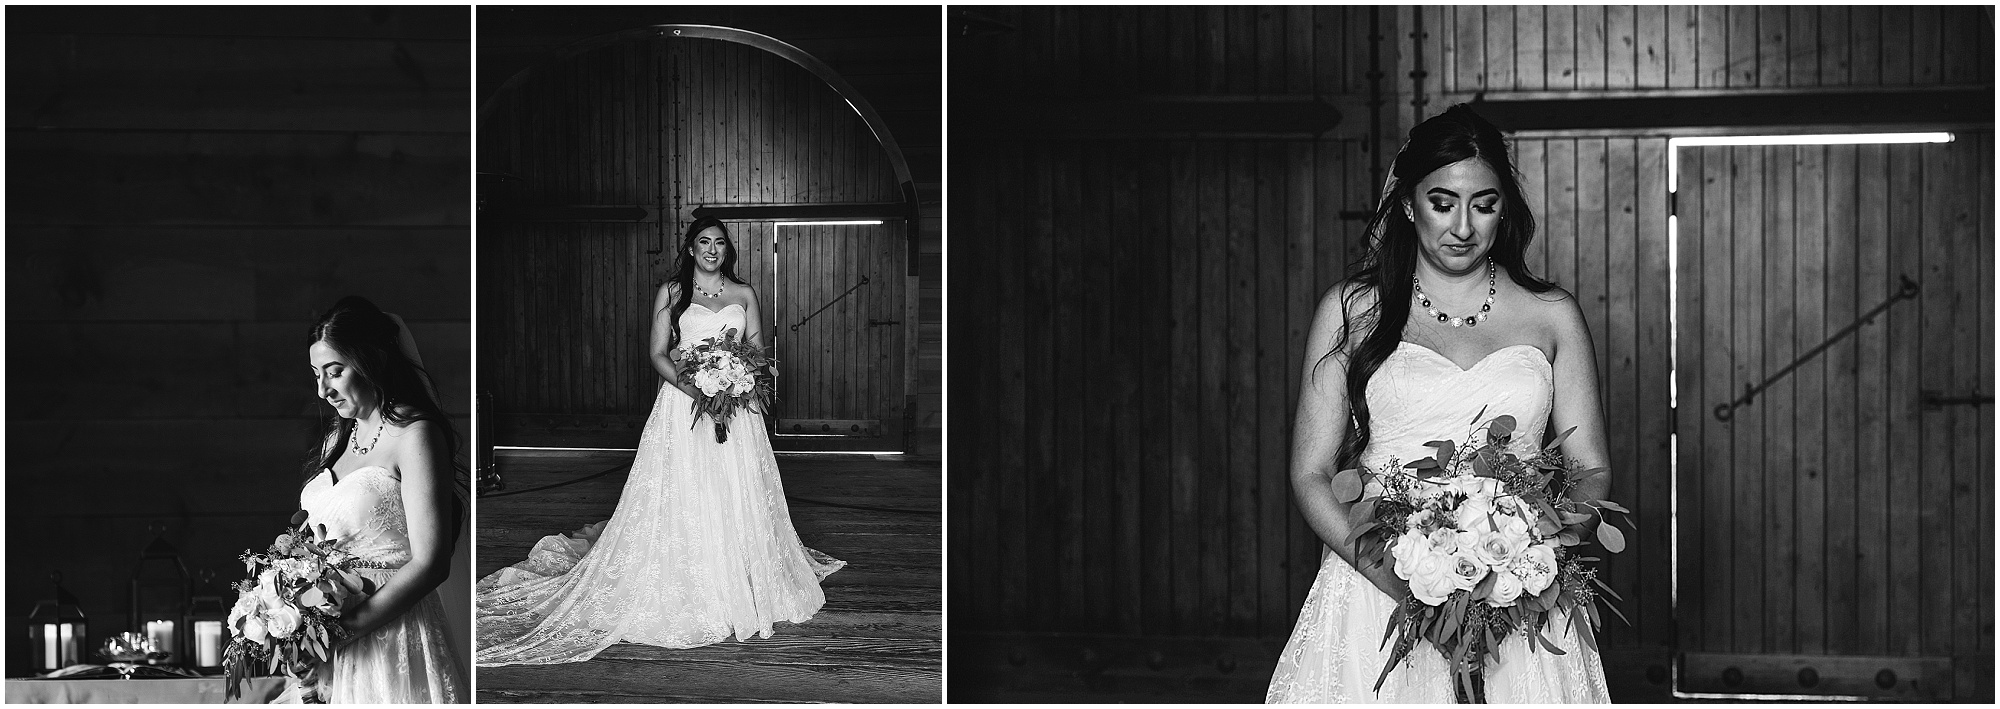 Beautiful black and white bridal portraits inside the Tuscan Stables at the Ranch at the Canyons wedding venue near Smith Rock. | Erica Swantek Photography